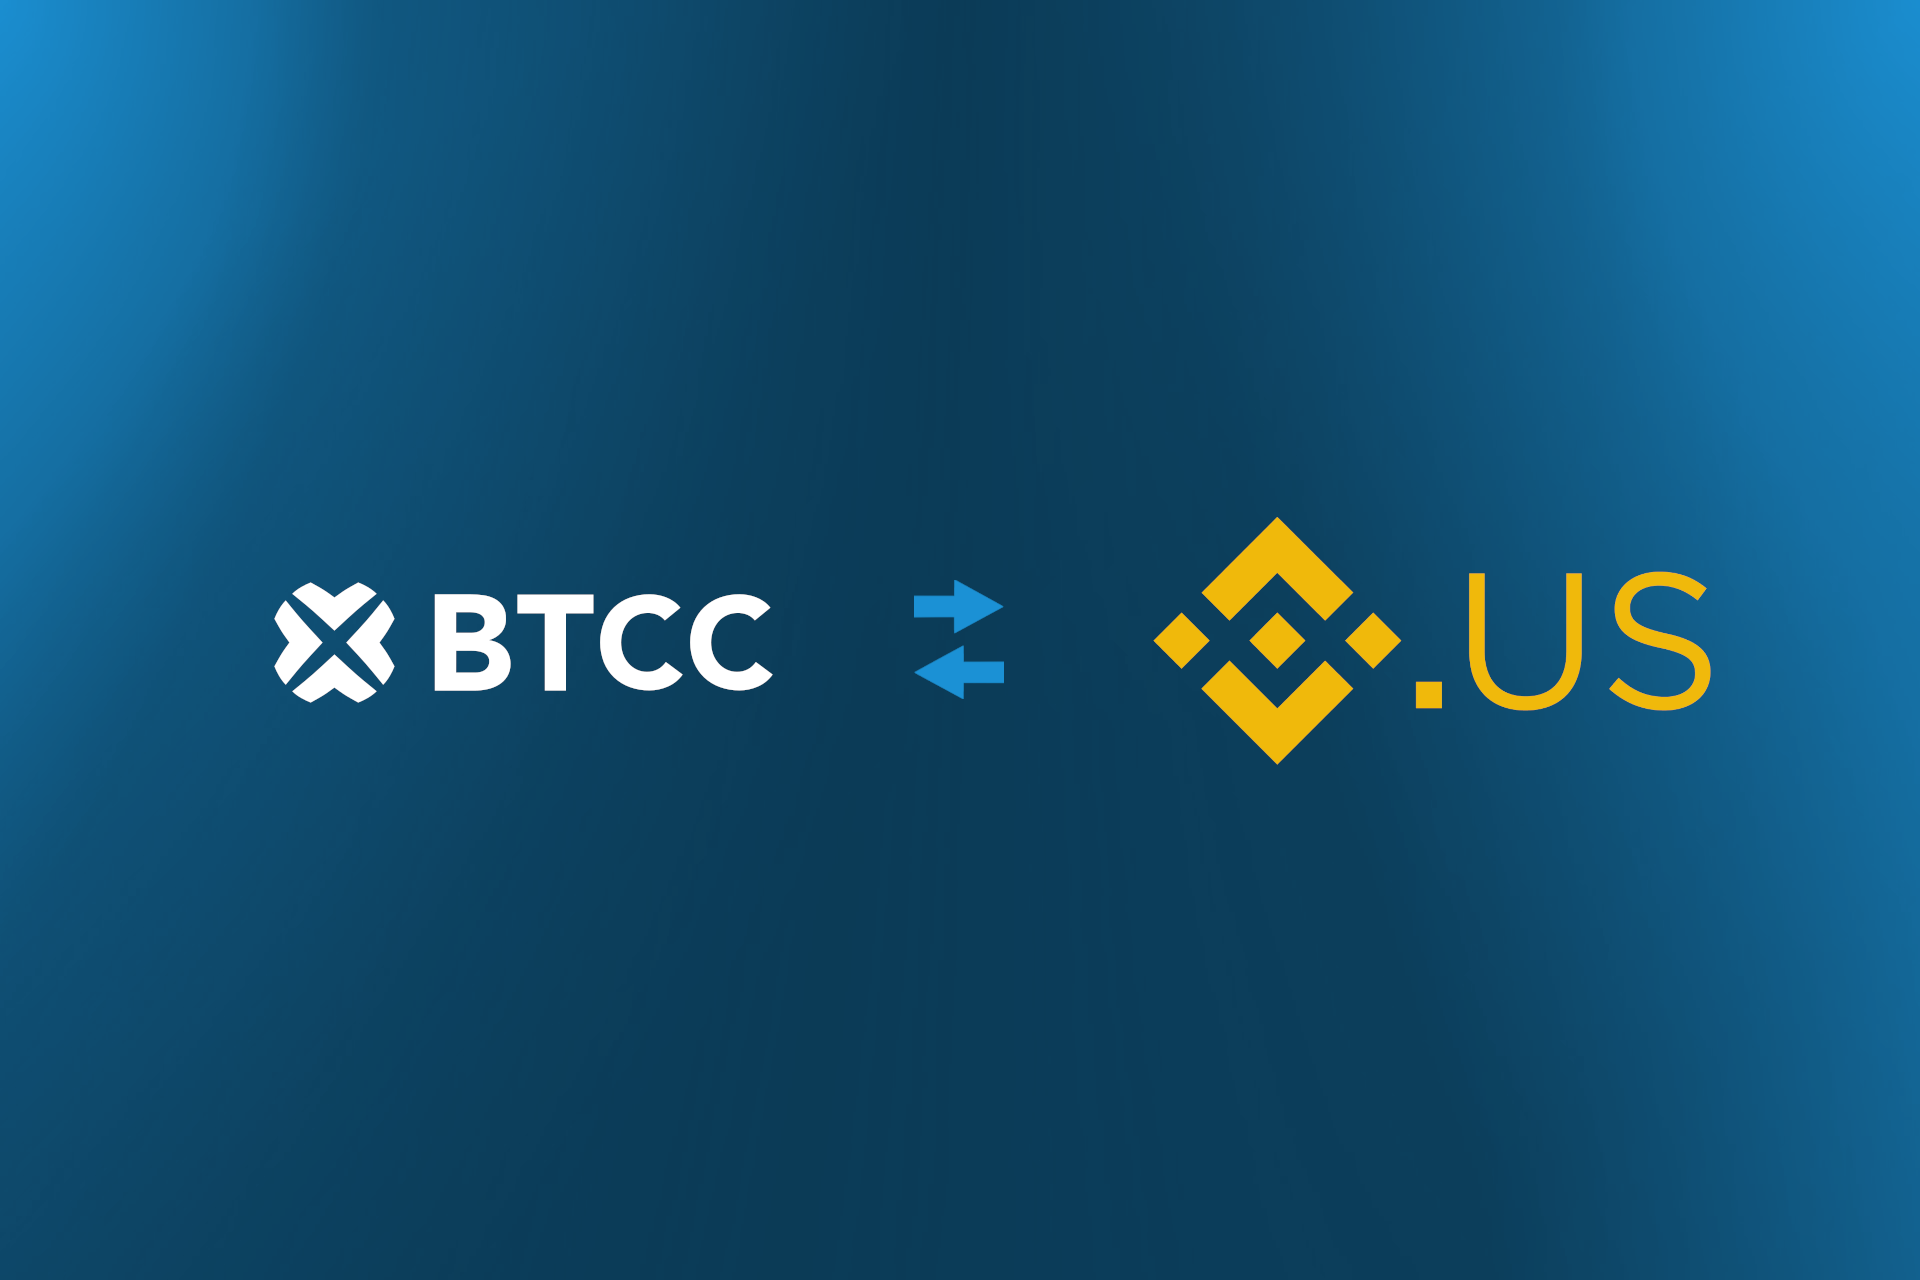 How to transfer crypto from Binance US to BTCC